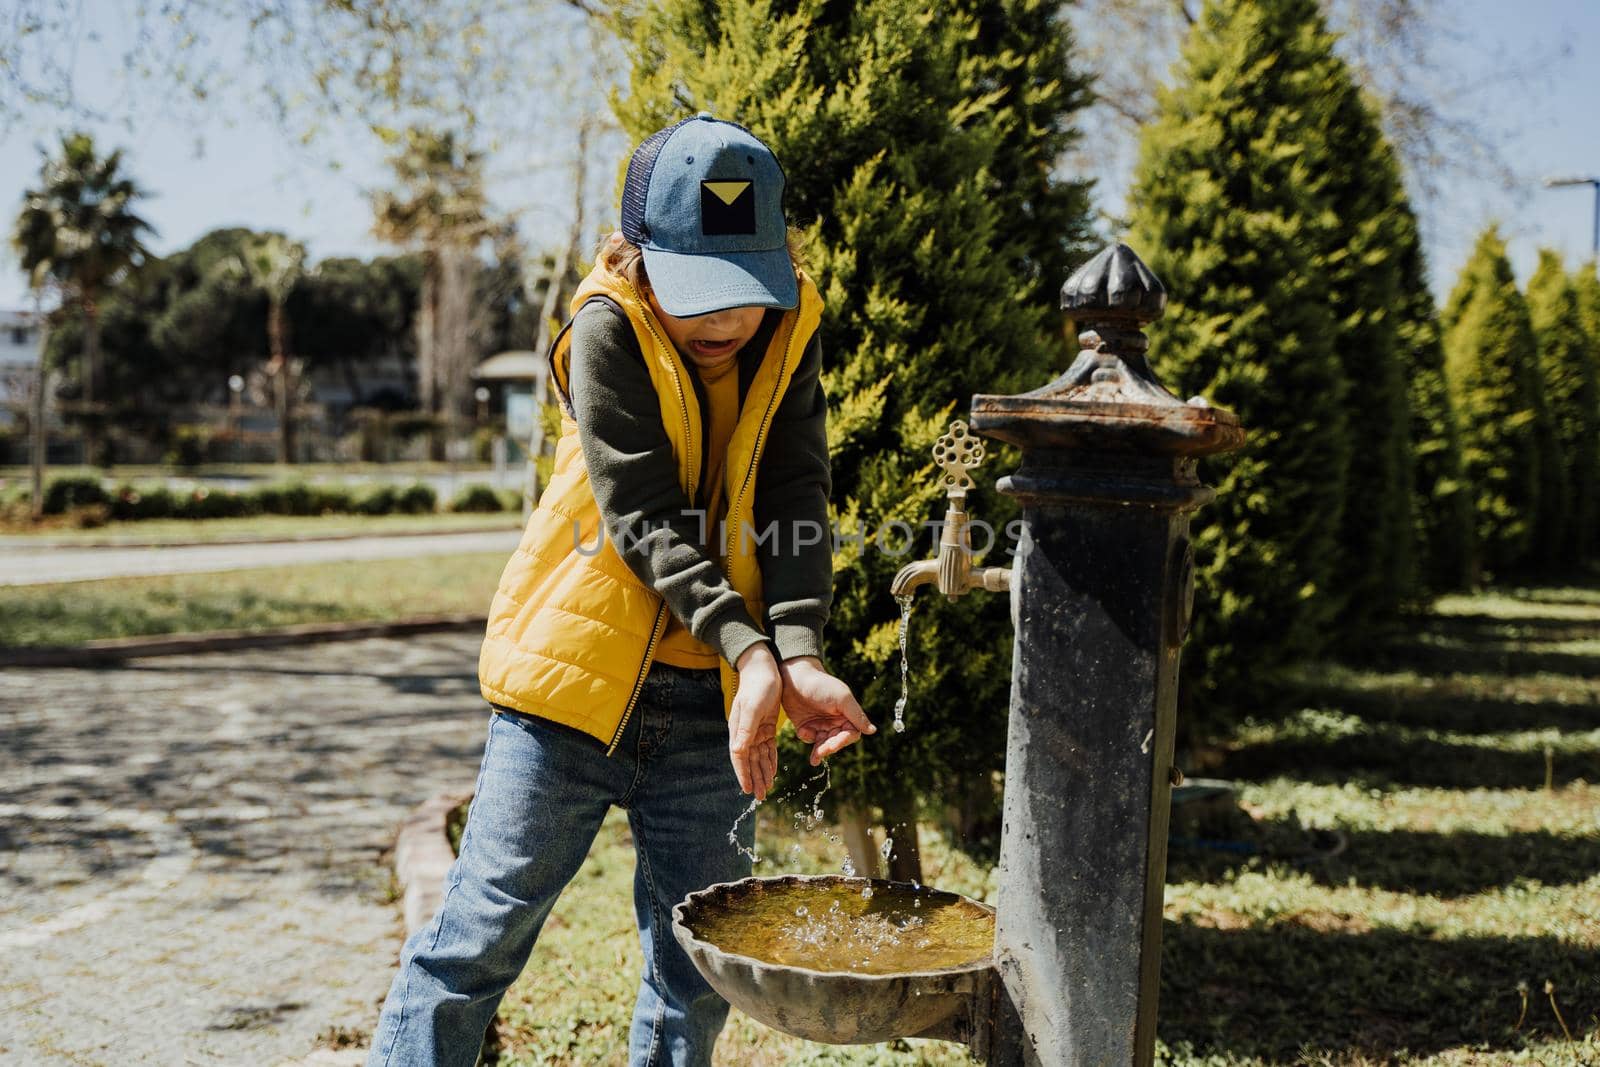 Kid schoolboy in casual clothing washing his hands in the street old fashioned drinking water fountain. Boy in blue jeans and yellow vest playing with water from drinking sprinkler in city park.